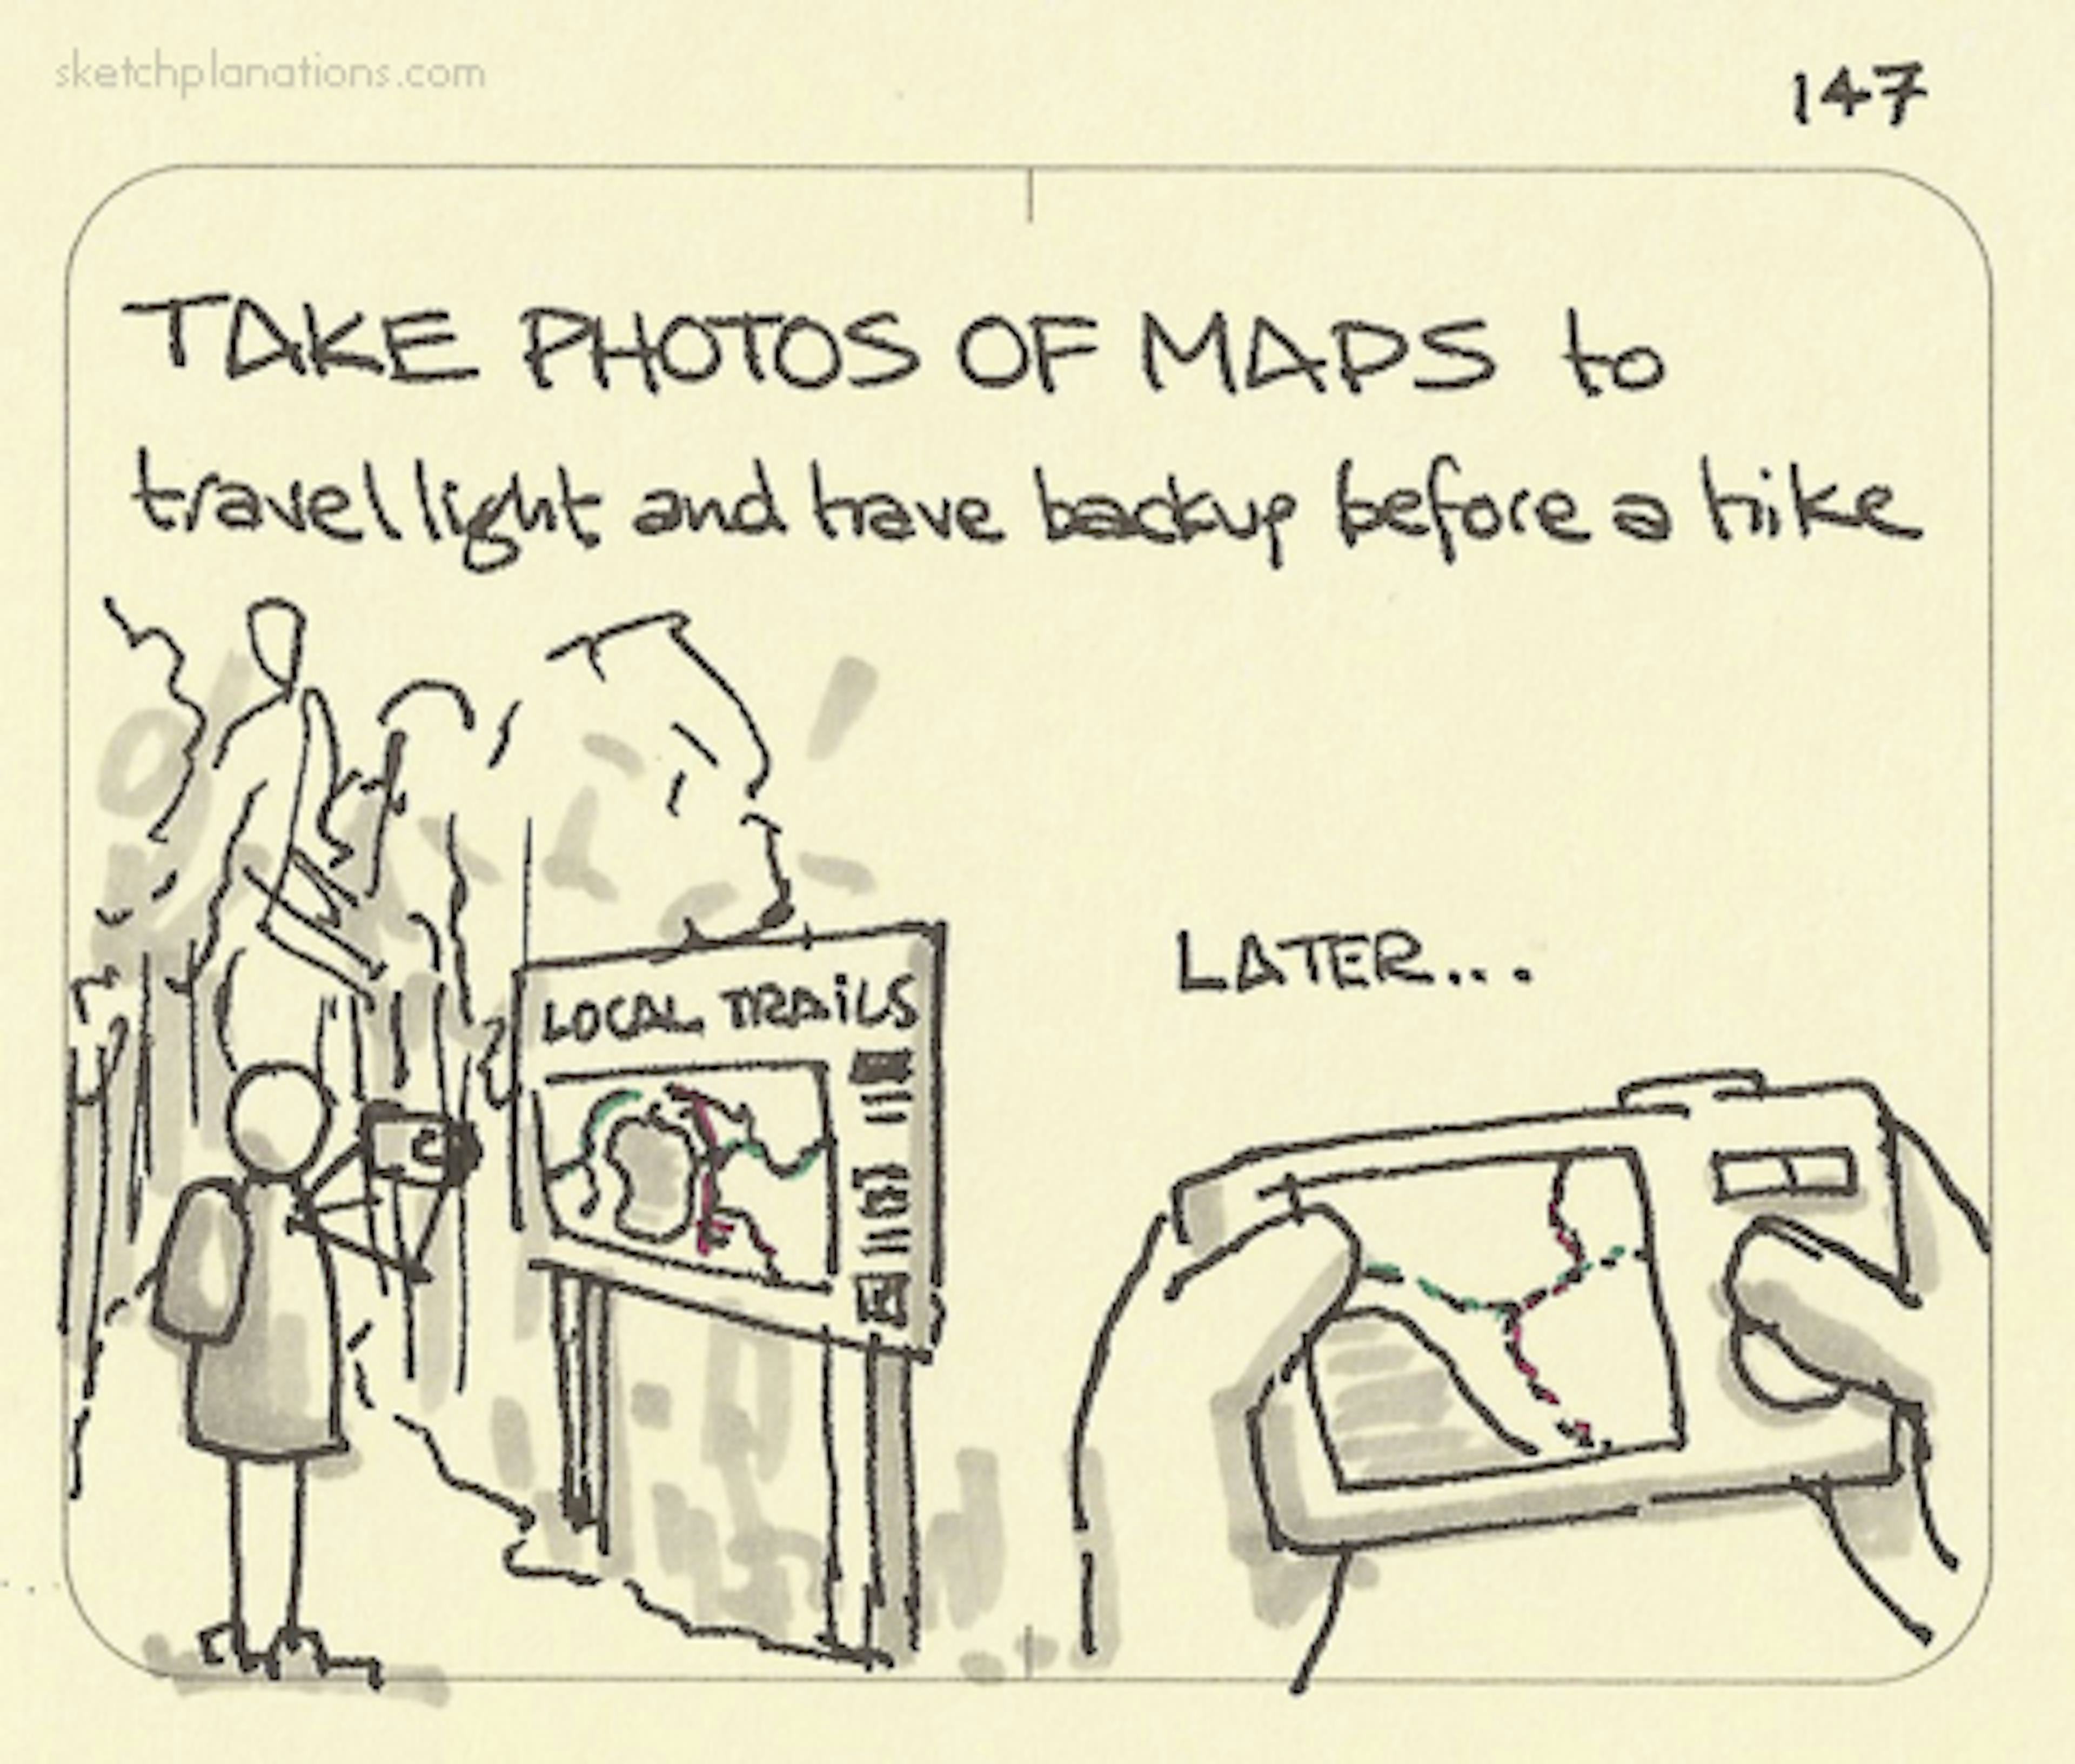 Take photos of maps, to travel light and have backup before a hike - Sketchplanations